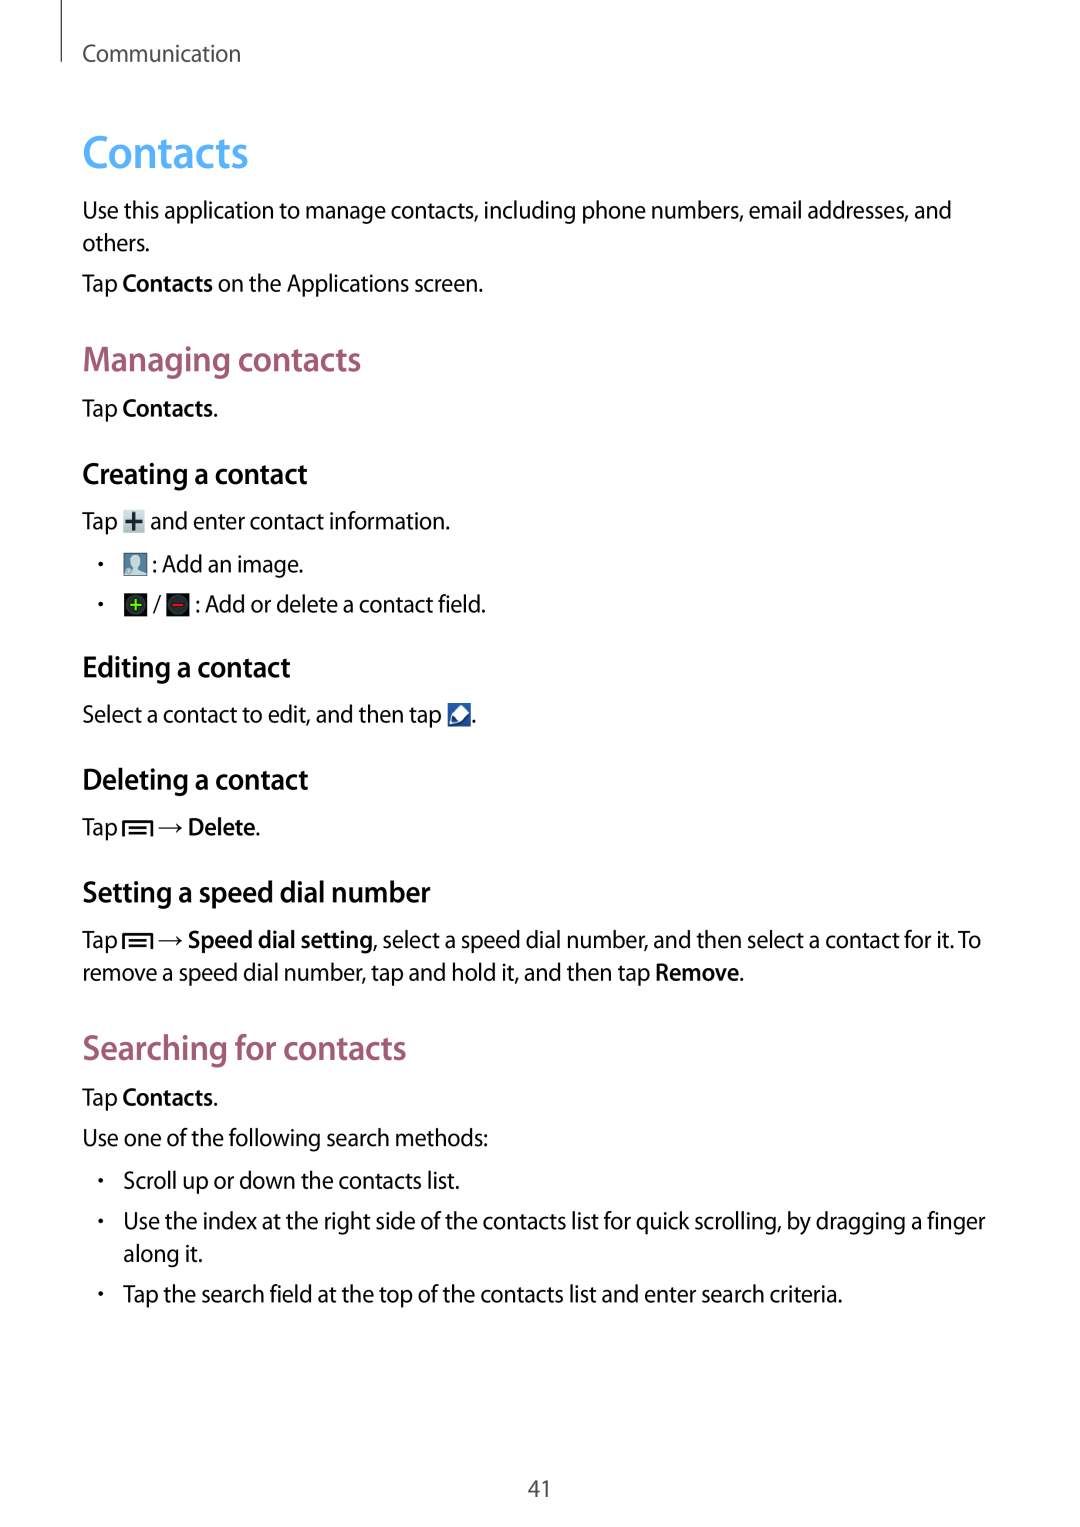 Samsung GT-S6790ZWYXEF manual Contacts, Managing contacts, Searching for contacts, Creating a contact, Editing a contact 